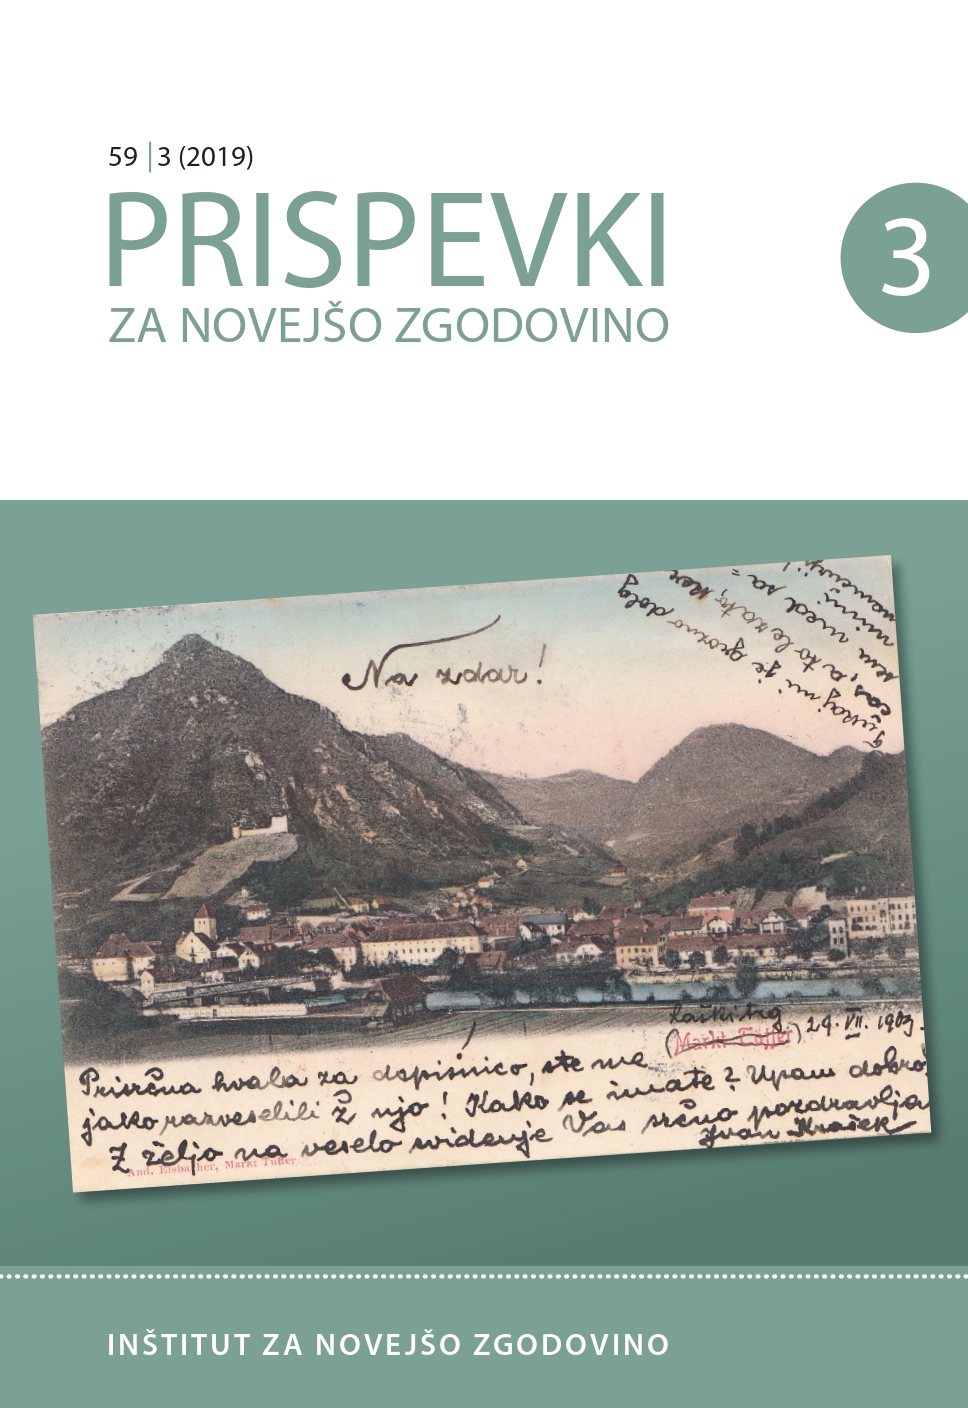 The Linguistic Landscape of Lower Styria on Picture Postcards (1890–1920)